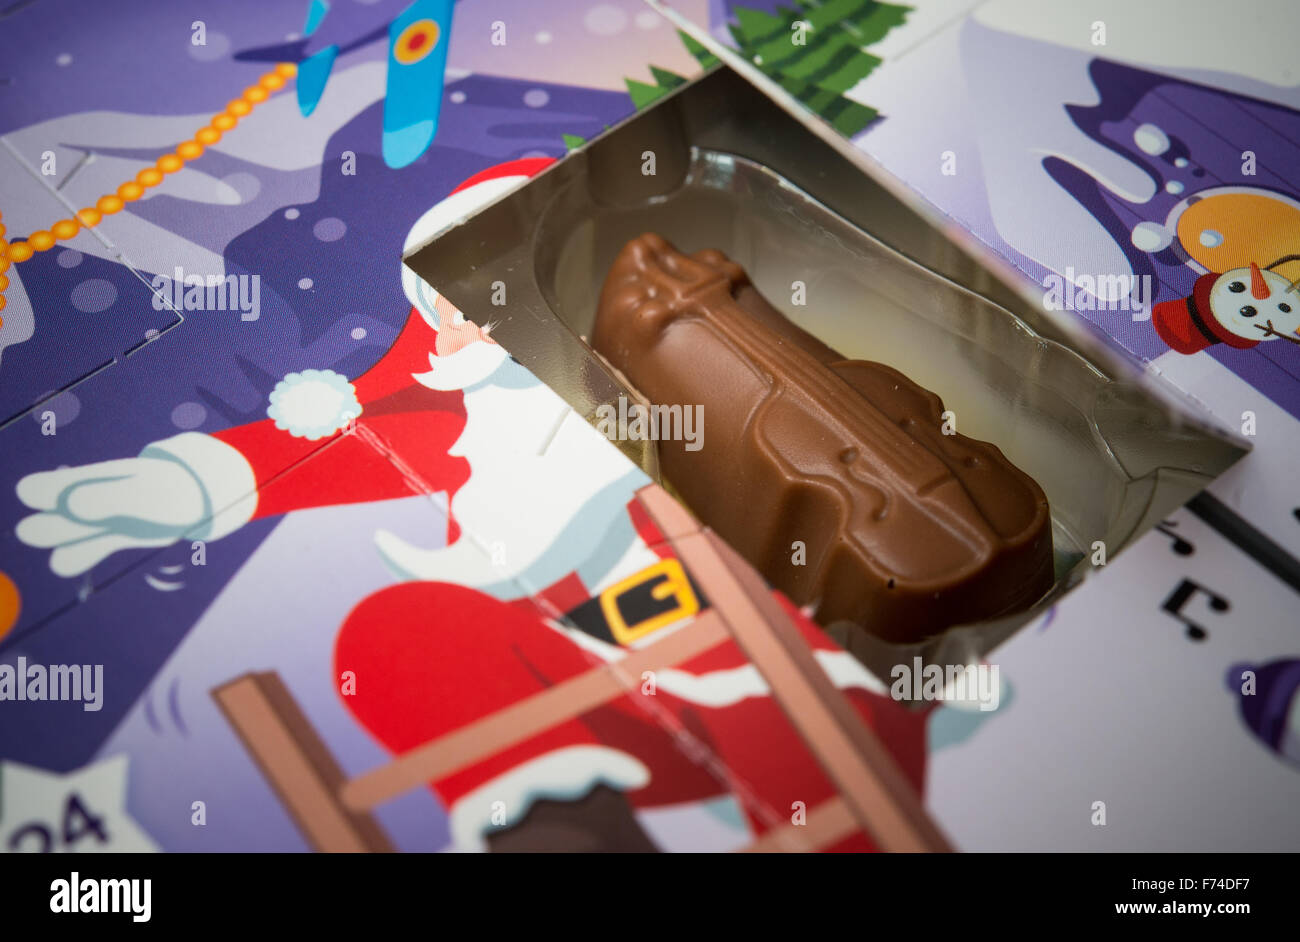 Sieversdorf, Germany. 24th Nov, 2015. A small piece of chocolate pictured next to the an opened door of an Advent calendar in Sieversdorf, Germany, 24 November 2015. Photo: PATRICK PLEUL/dpa/Alamy Live News Stock Photo